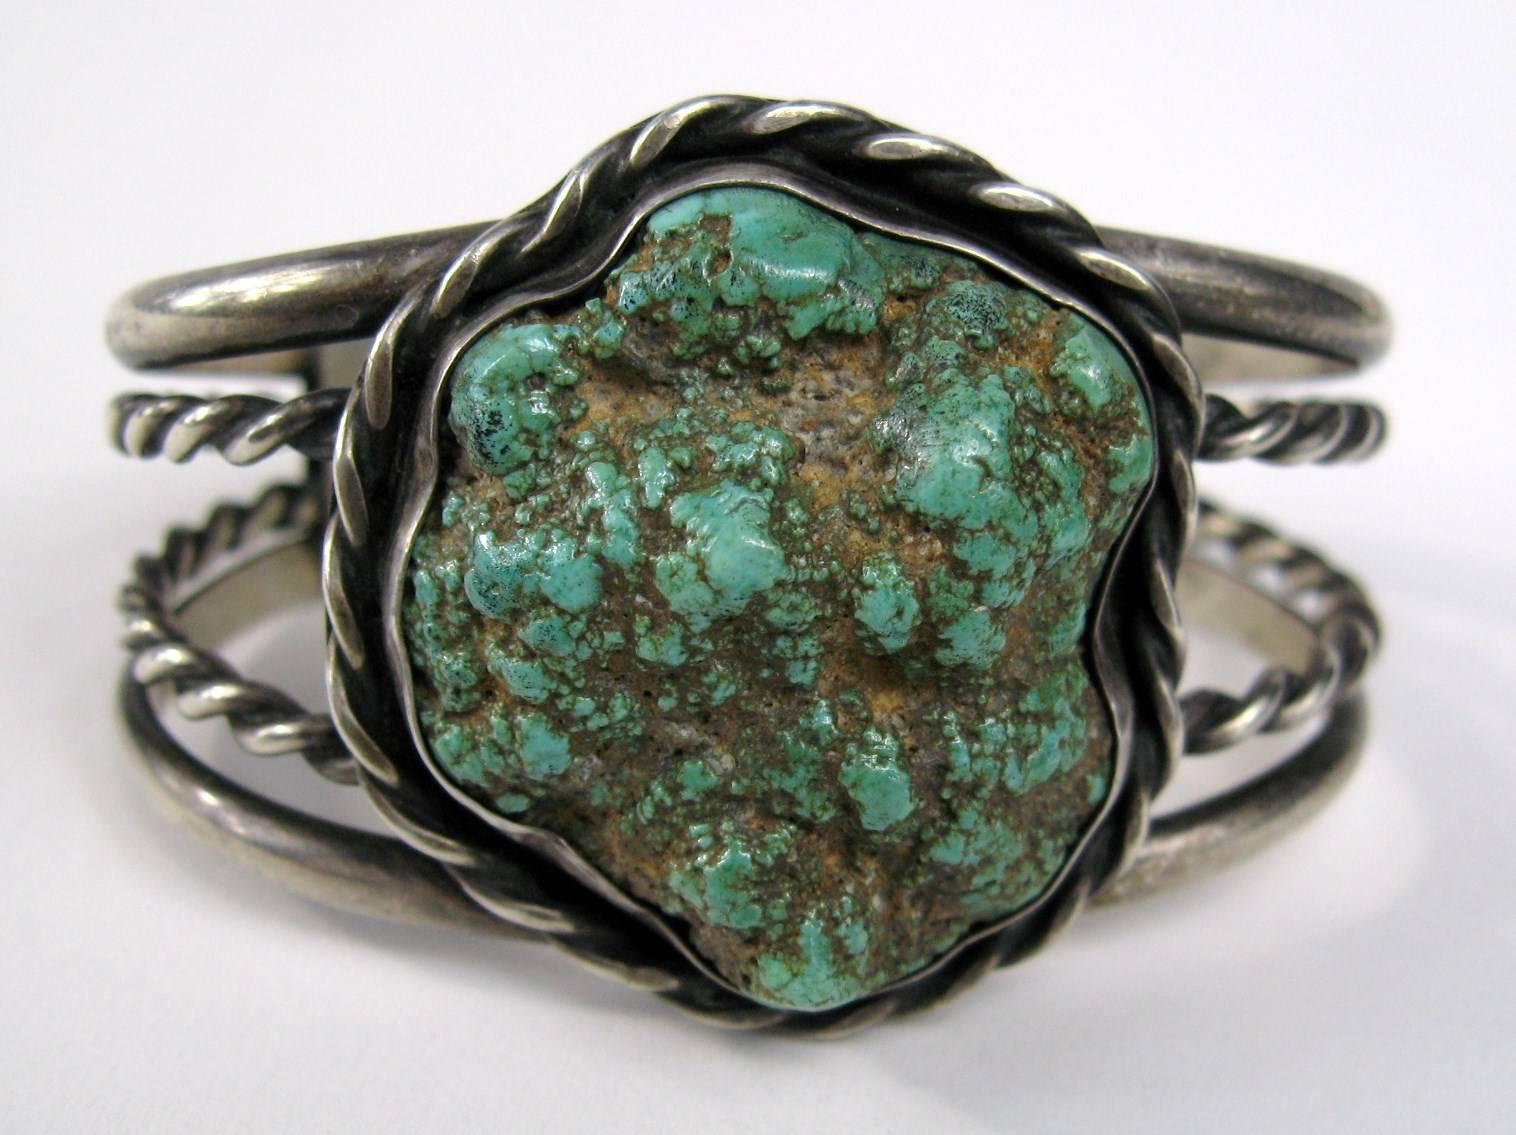 Lovely Old Pawn hand crafted Navajo Sterling bracelet. 4 Rings, 2 solid and 2 are twisted silver. Large sea foam turquoise stone measuring  approx. 1.20 inches x 1.40 inches. The bracelet measures 1.60inches at the widest and graduates down to .60